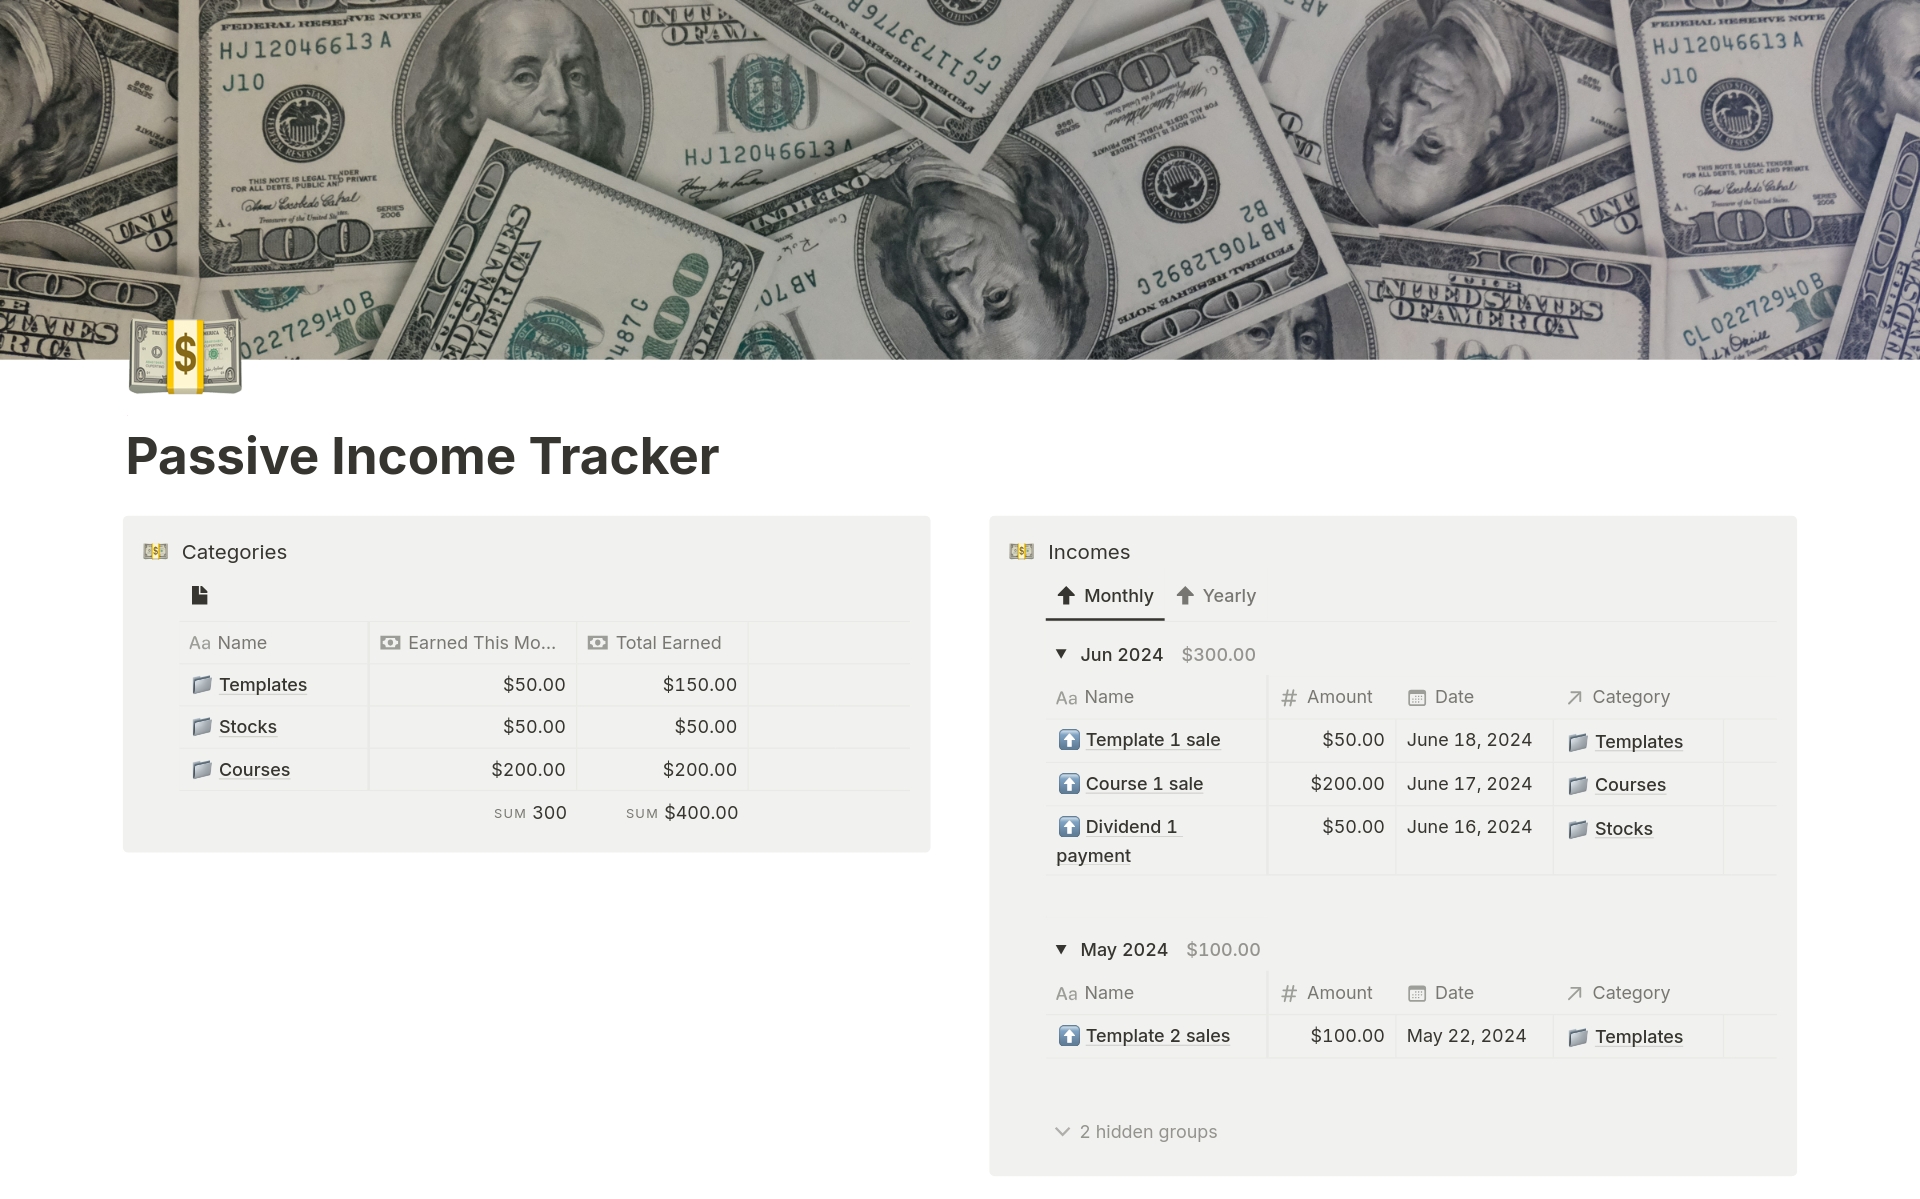 Easily manage your finances with our Passive Income Tracker template. Track monthly and yearly income from all sources, stay organized and make smart financial decisions. Ideal for reaching your financial goals. Start tracking your passive income today.